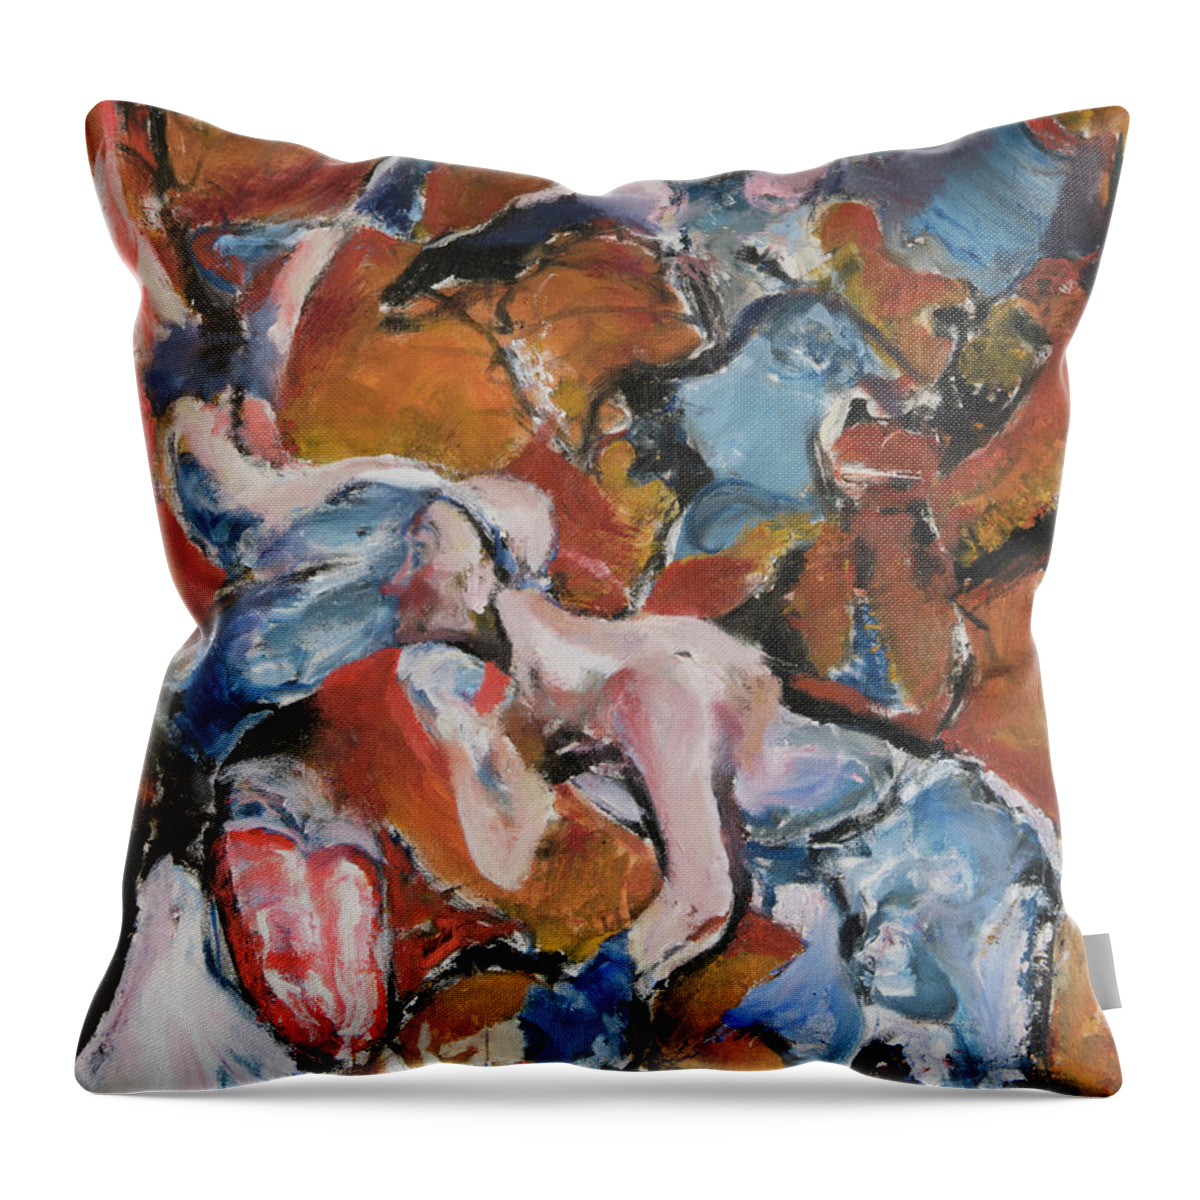 Abstract Figures Throw Pillow featuring the painting Andelusian Tessellation by Craig Newland